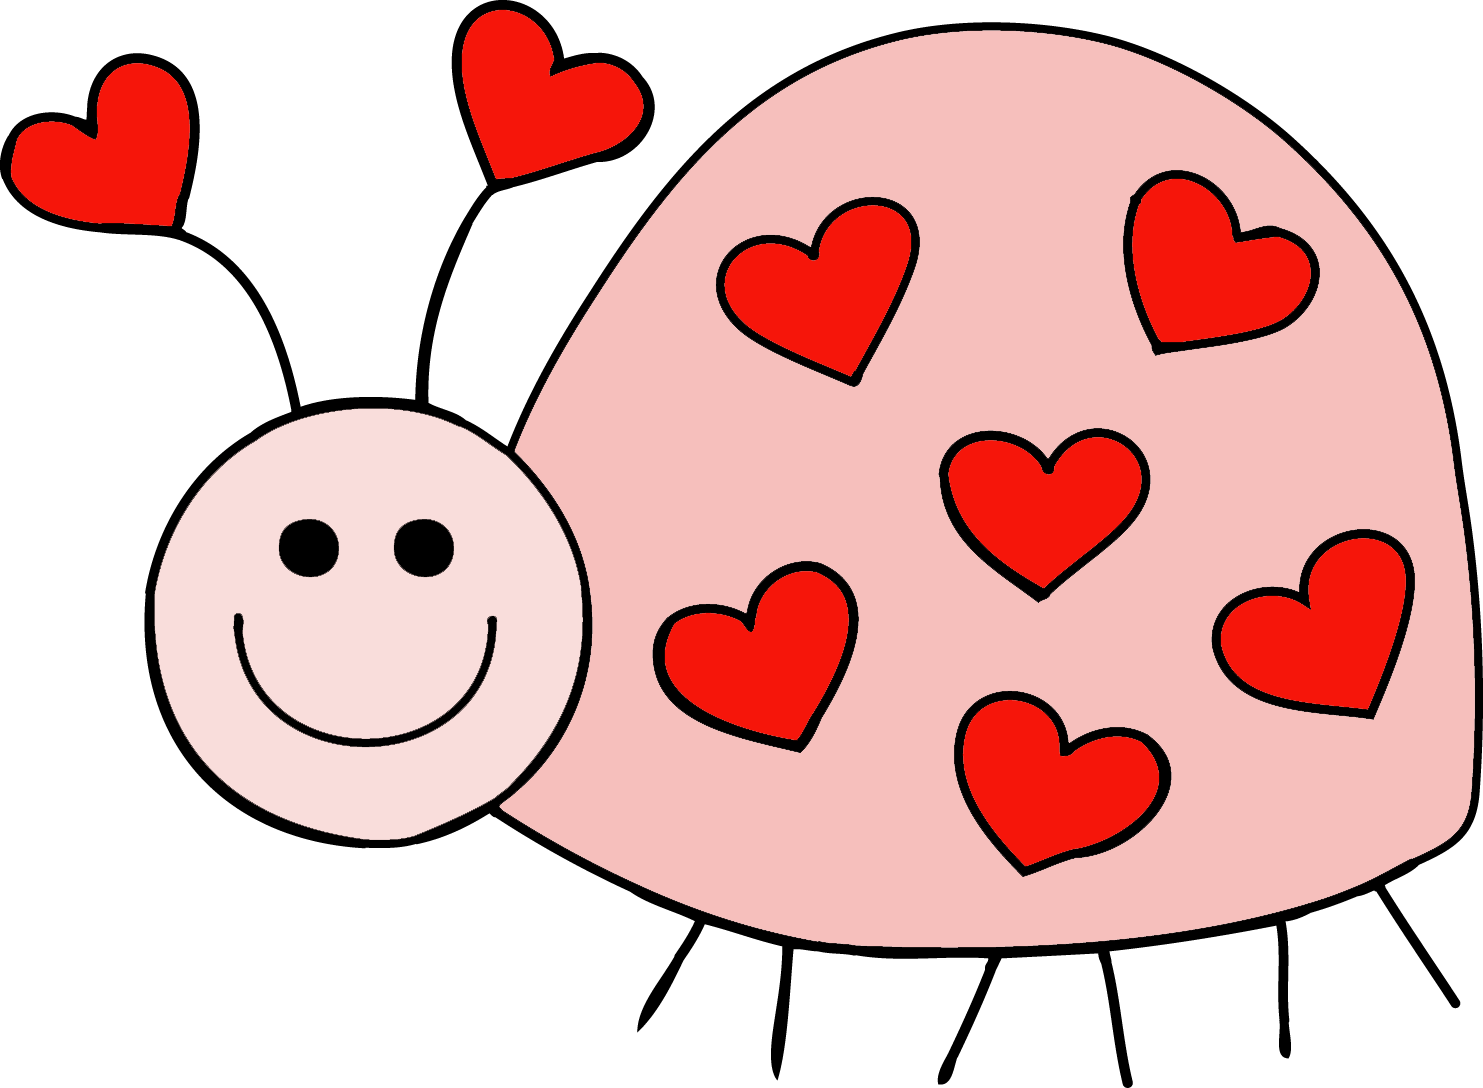 Free february clipart image